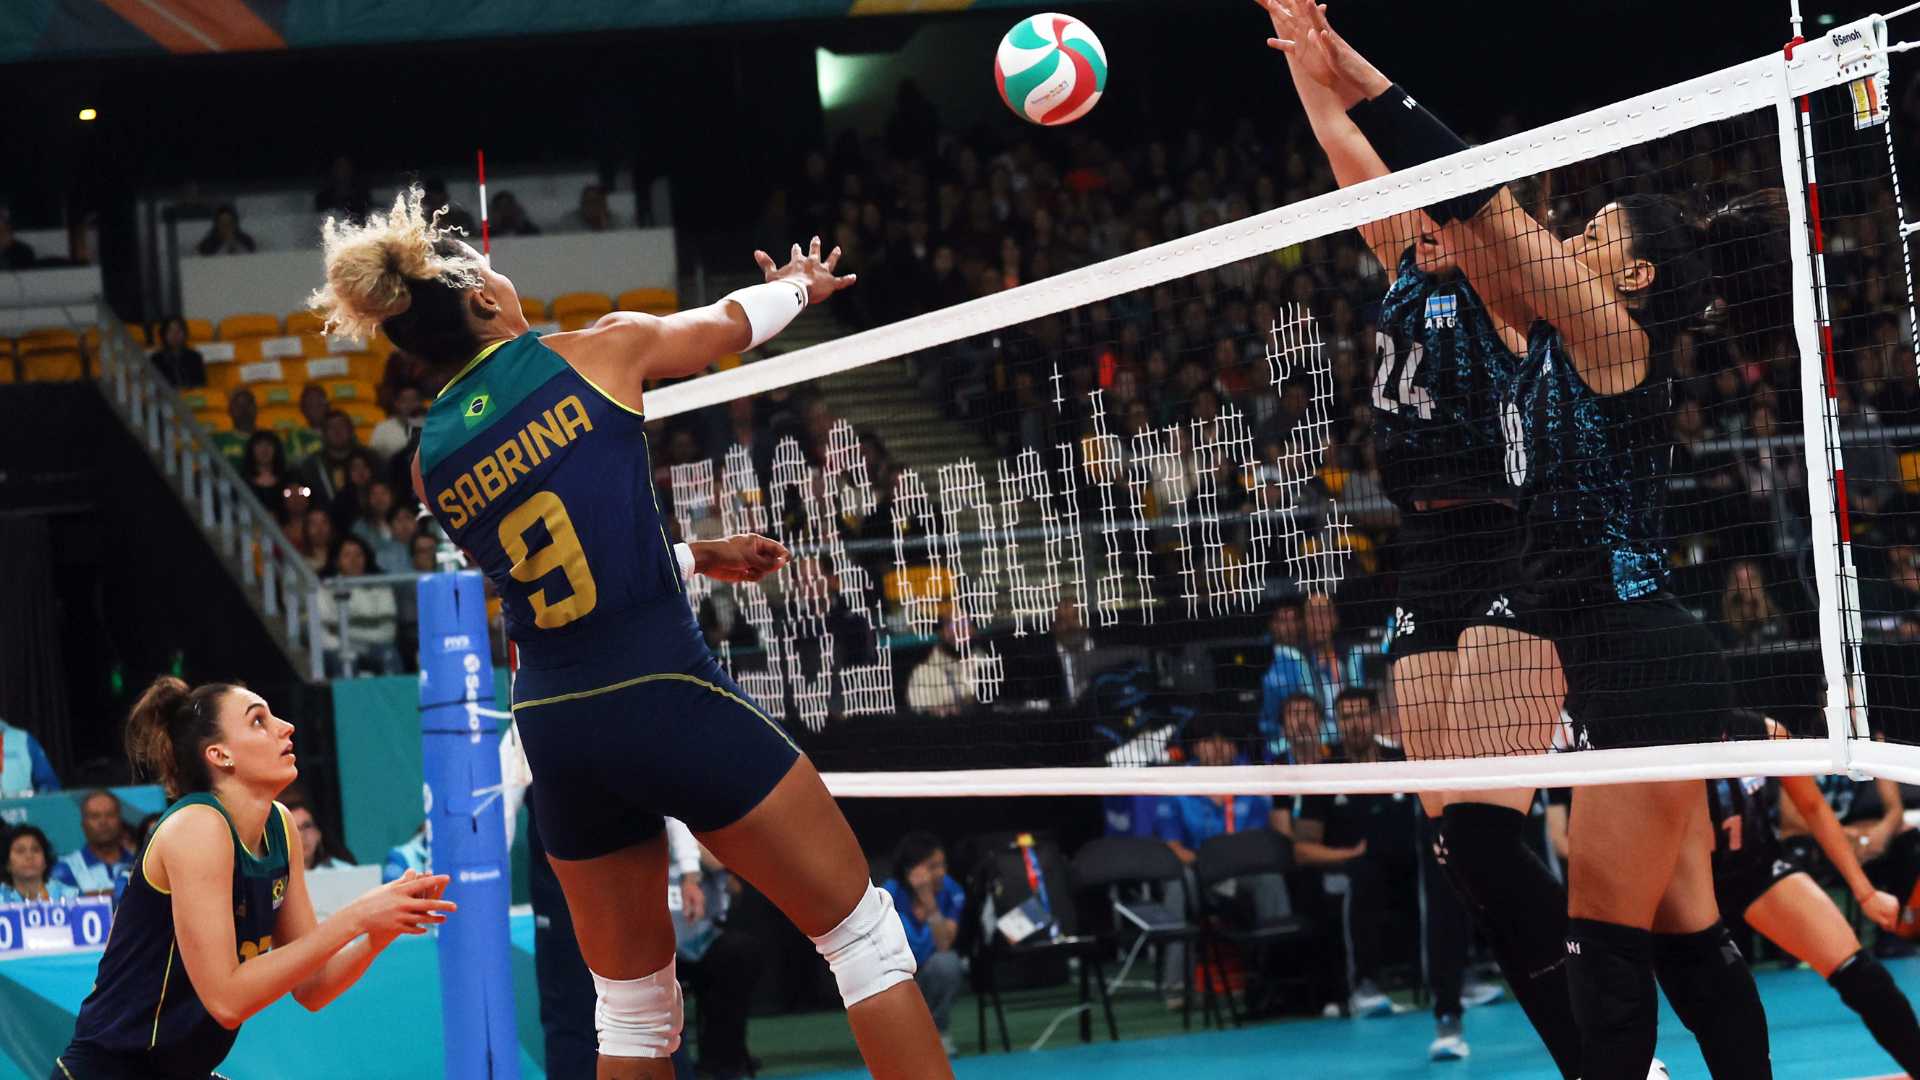 Brazil Defeats Argentina in Women's Volleyball and Leads Group A